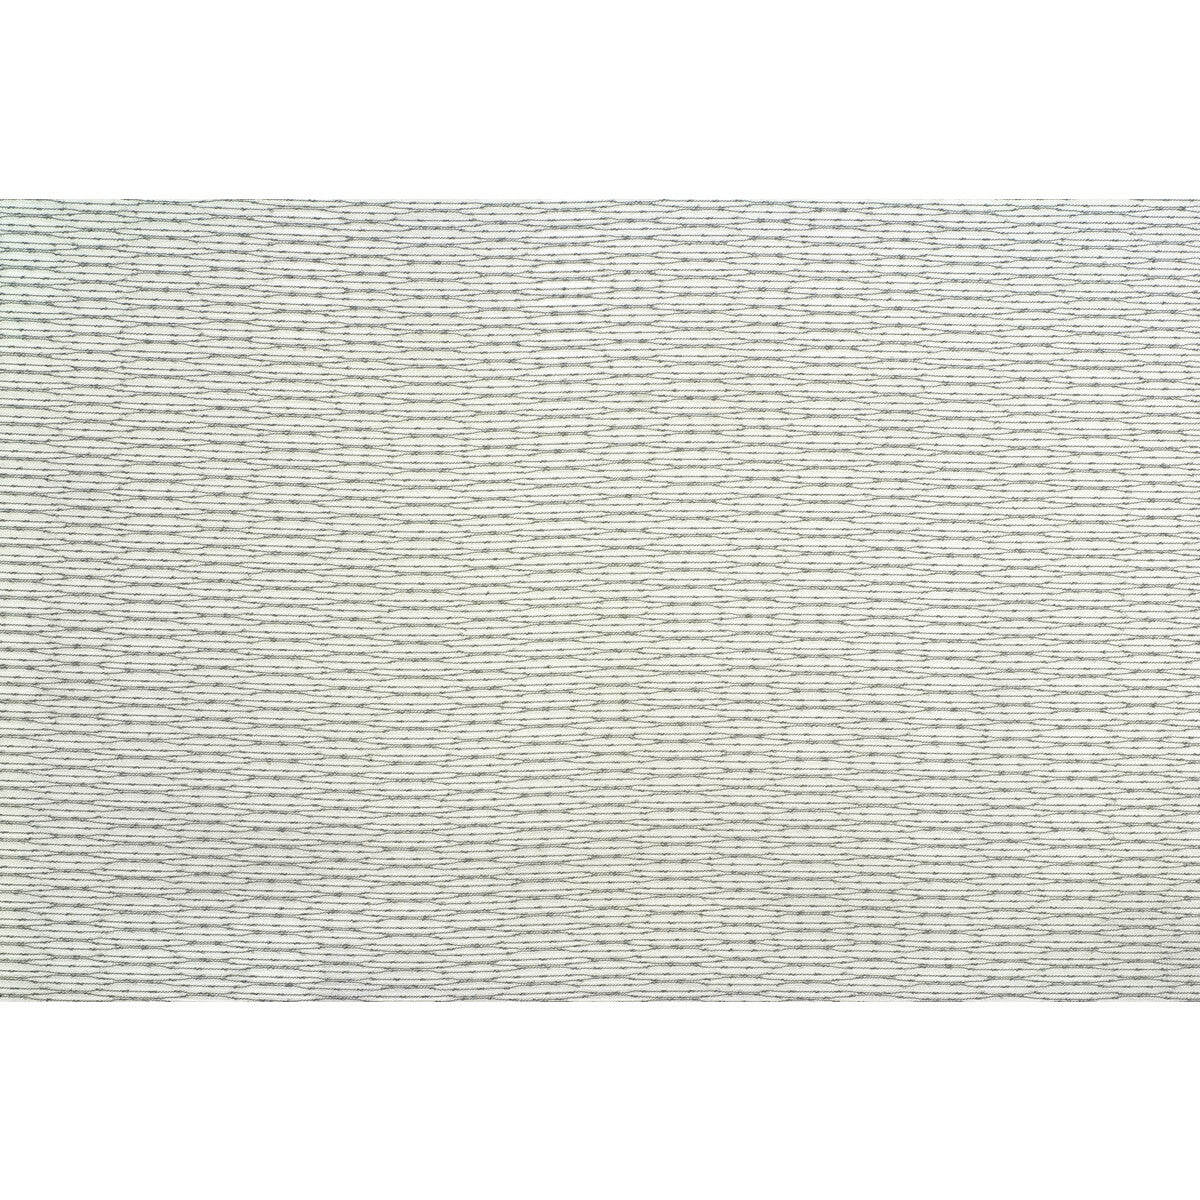 Thelma fabric in silver color - pattern 4286.11.0 - by Kravet Contract